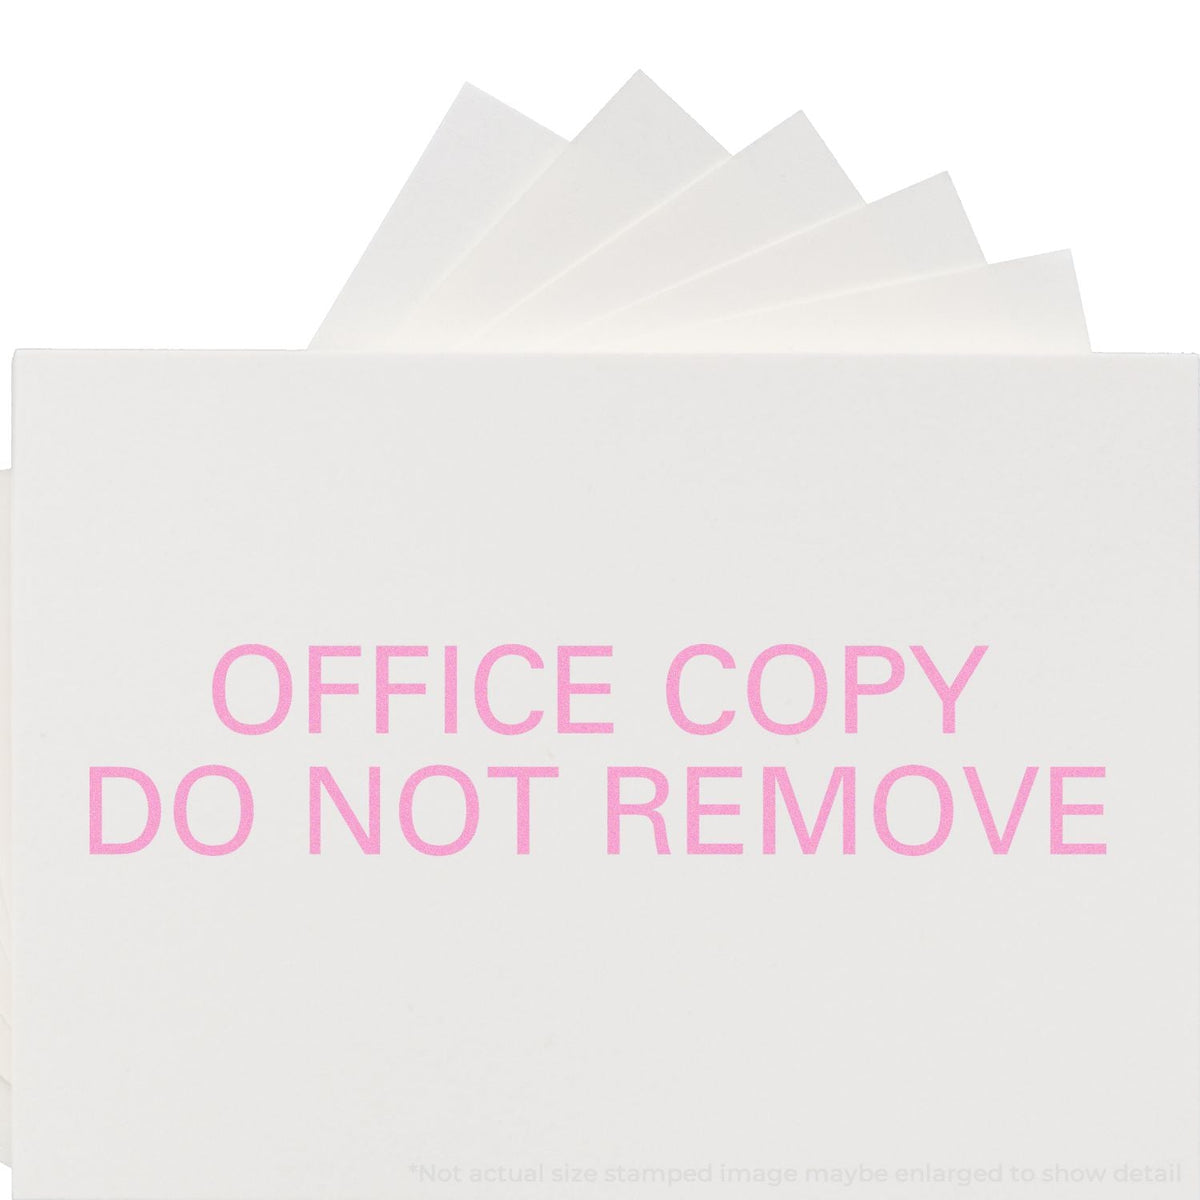 Self-Inking Office Copy Do Not Remove Stamp Lifestyle Photo